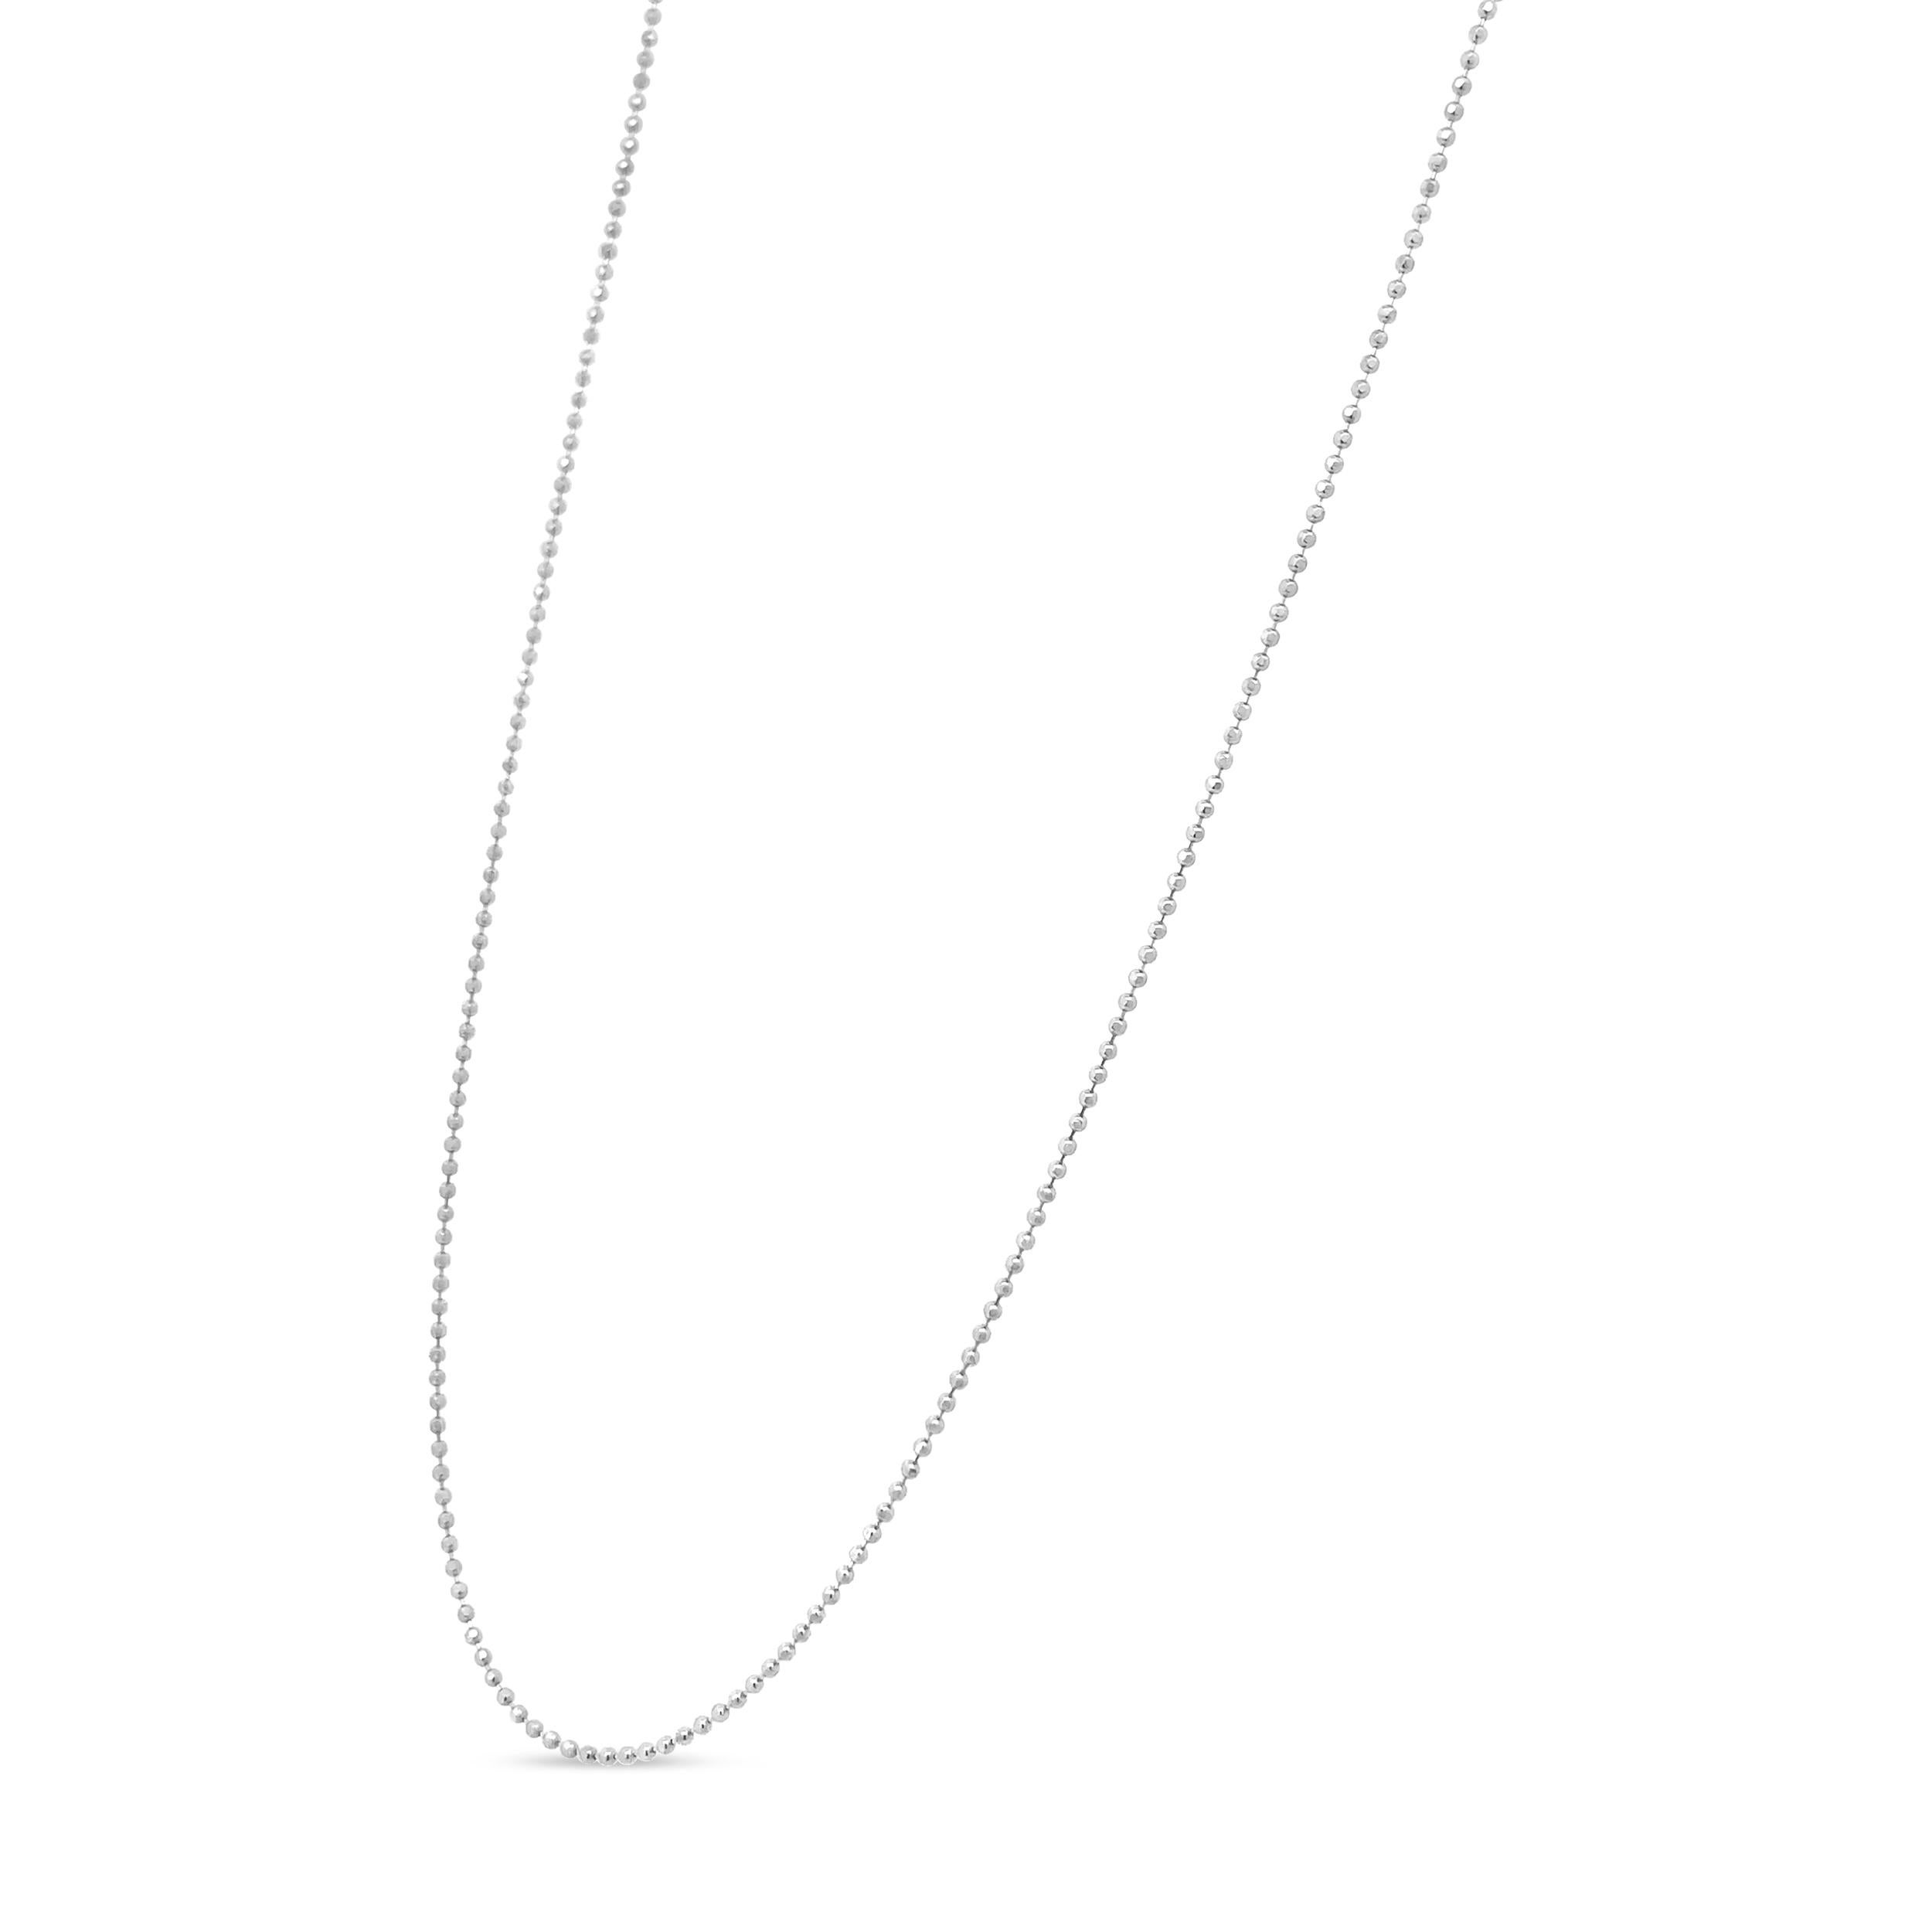 Presenting a feminine classic: a simple and dainty .925 sterling silver Ball bead chain. This thin, .70 millimeter wide chain fastens securely with a standard spring ring clasp. It can replace most chains and is perfect paired with small to medium